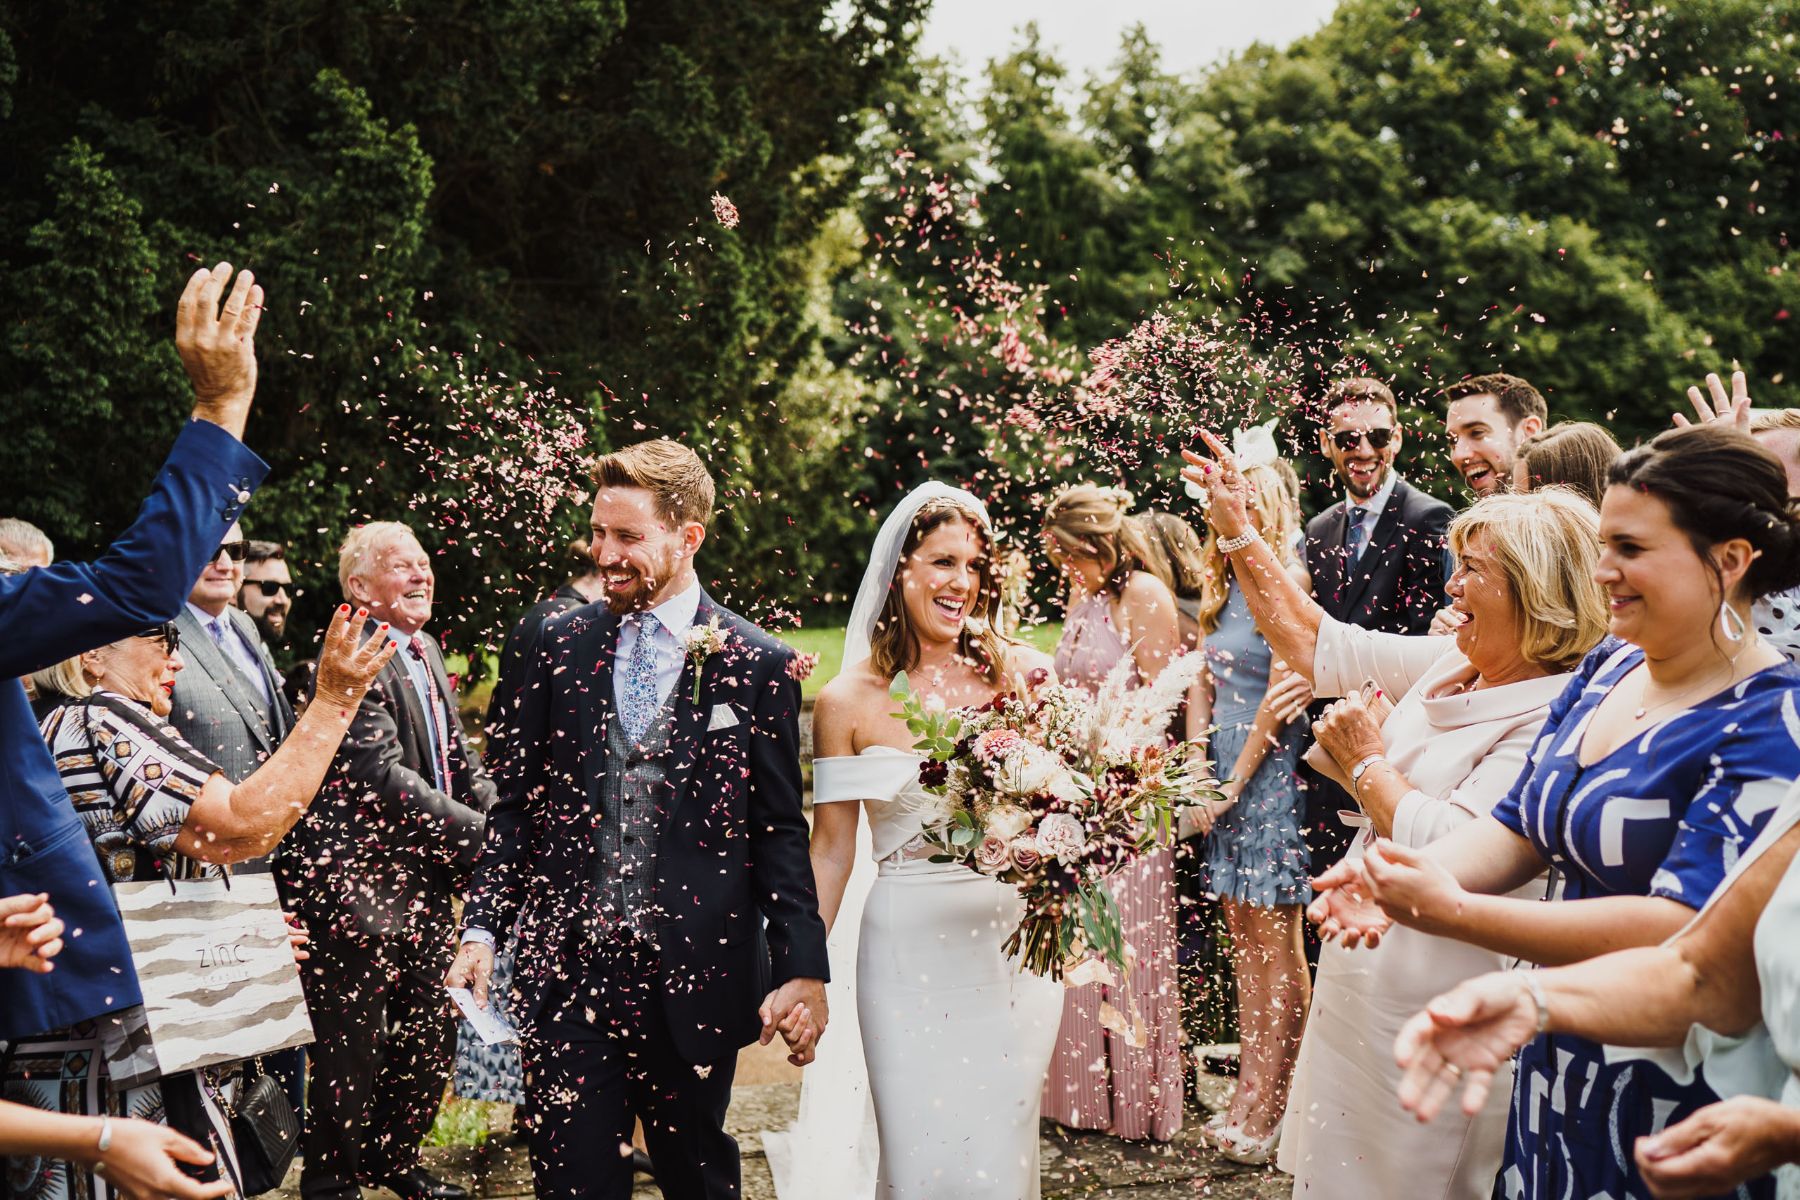 Wedding guests throwing confetti on smiling newlywed couple